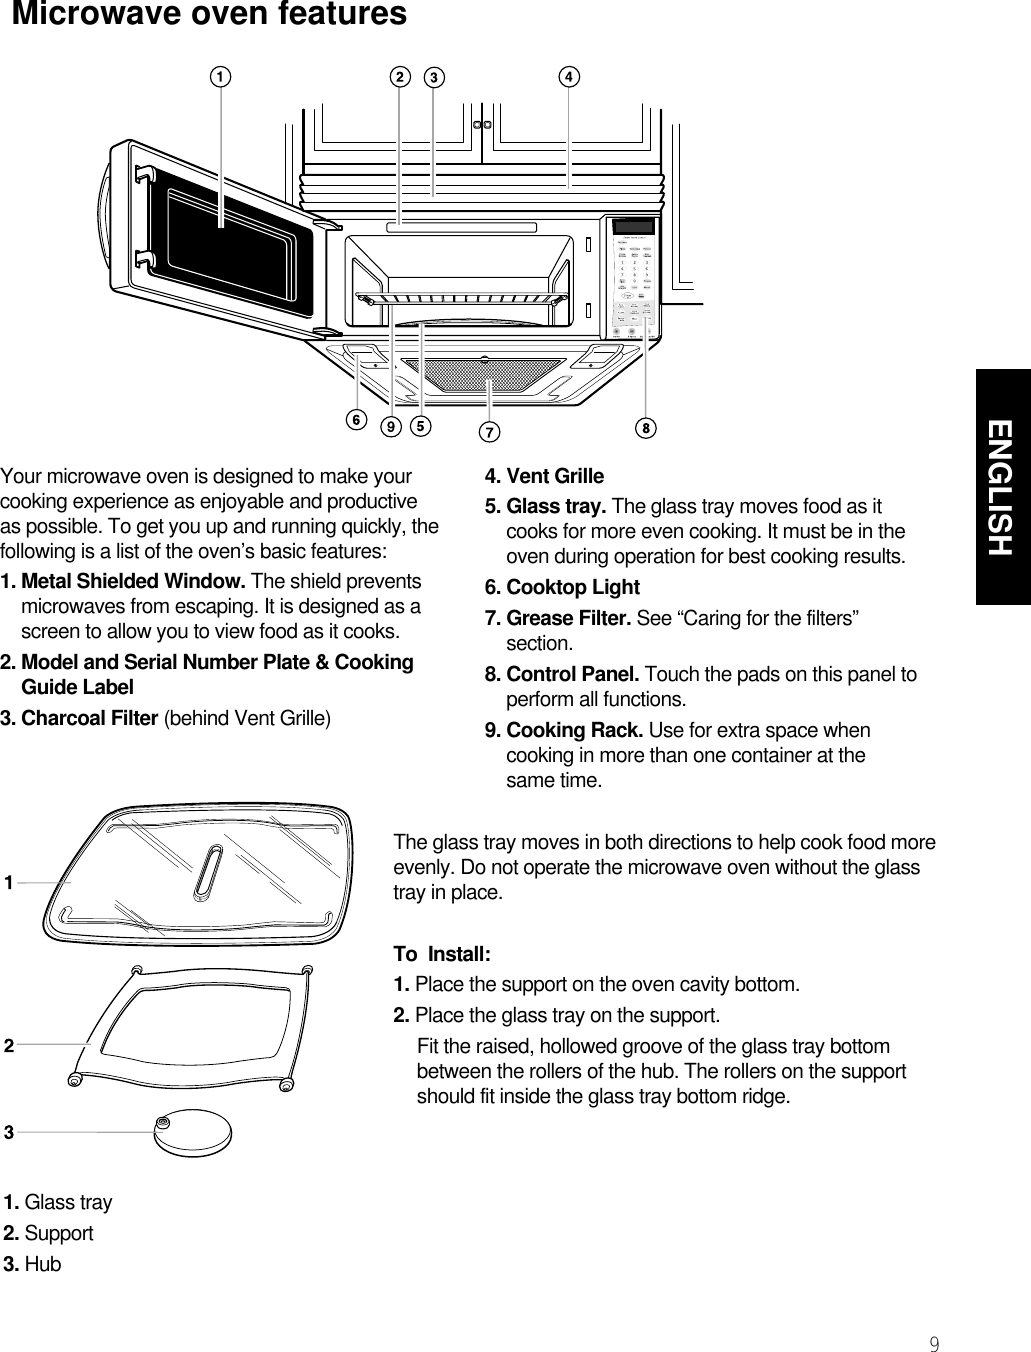 9ENGLISHGETTING TO KNOW YOUR MICROWAVE OVEN  Microwave oven featuresYour microwave oven is designed to make yourcooking experience as enjoyable and productiveas possible. To get you up and running quickly, thefollowing is a list of the oven’s basic features:1. Metal Shielded Window. The shield preventsmicrowaves from escaping. It is designed as ascreen to allow you to view food as it cooks.2. Model and Serial Number Plate &amp; CookingGuide Label3. Charcoal Filter (behind Vent Grille)4. Vent Grille5. Glass tray. The glass tray moves food as itcooks for more even cooking. It must be in theoven during operation for best cooking results.6. Cooktop Light7. Grease Filter. See “Caring for the filters”section.8. Control Panel. Touch the pads on this panel toperform all functions.9. Cooking Rack. Use for extra space whencooking in more than one container at the same time.The glass tray moves in both directions to help cook food moreevenly. Do not operate the microwave oven without the glasstray in place. To  Install:1. Place the support on the oven cavity bottom.2. Place the glass tray on the support.Fit the raised, hollowed groove of the glass tray bottombetween the rollers of the hub. The rollers on the supportshould fit inside the glass tray bottom ridge.1. Glass tray2. Support3. Hub